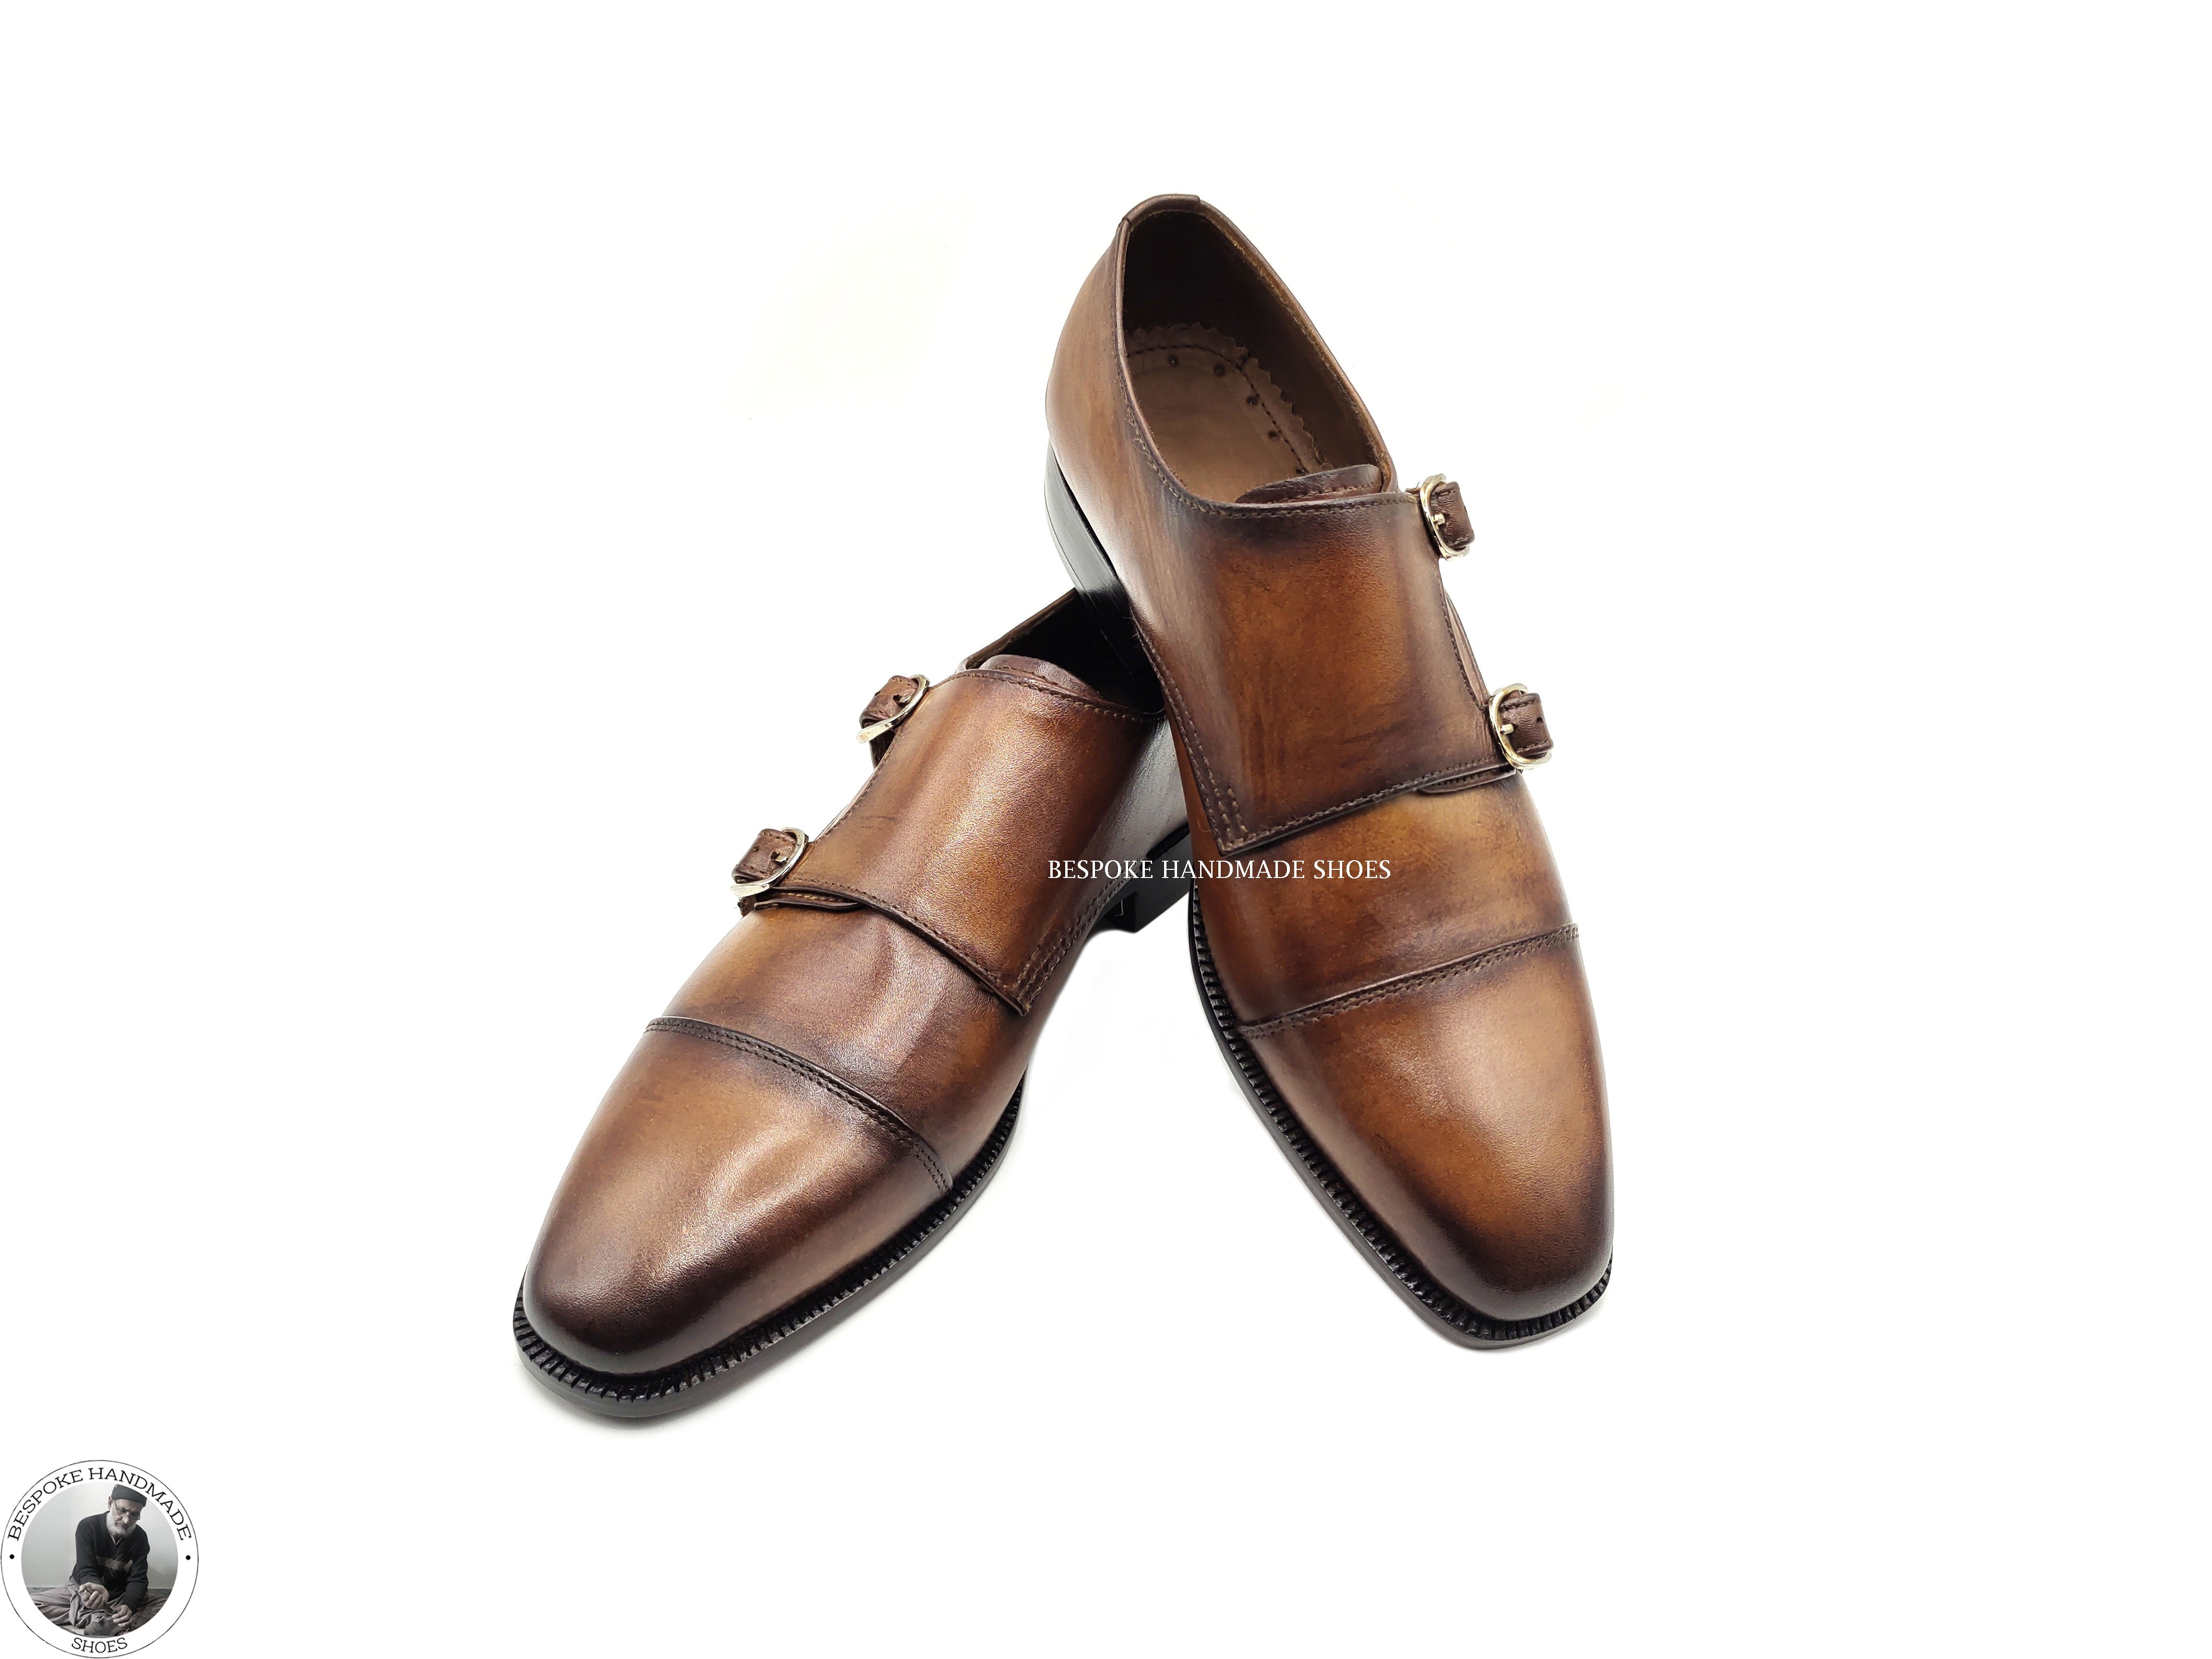 Bespoke Handcrafted Dress Shoes, Brown Color Premium Quality Double Monk Strap And Cap toe Casual Shoes